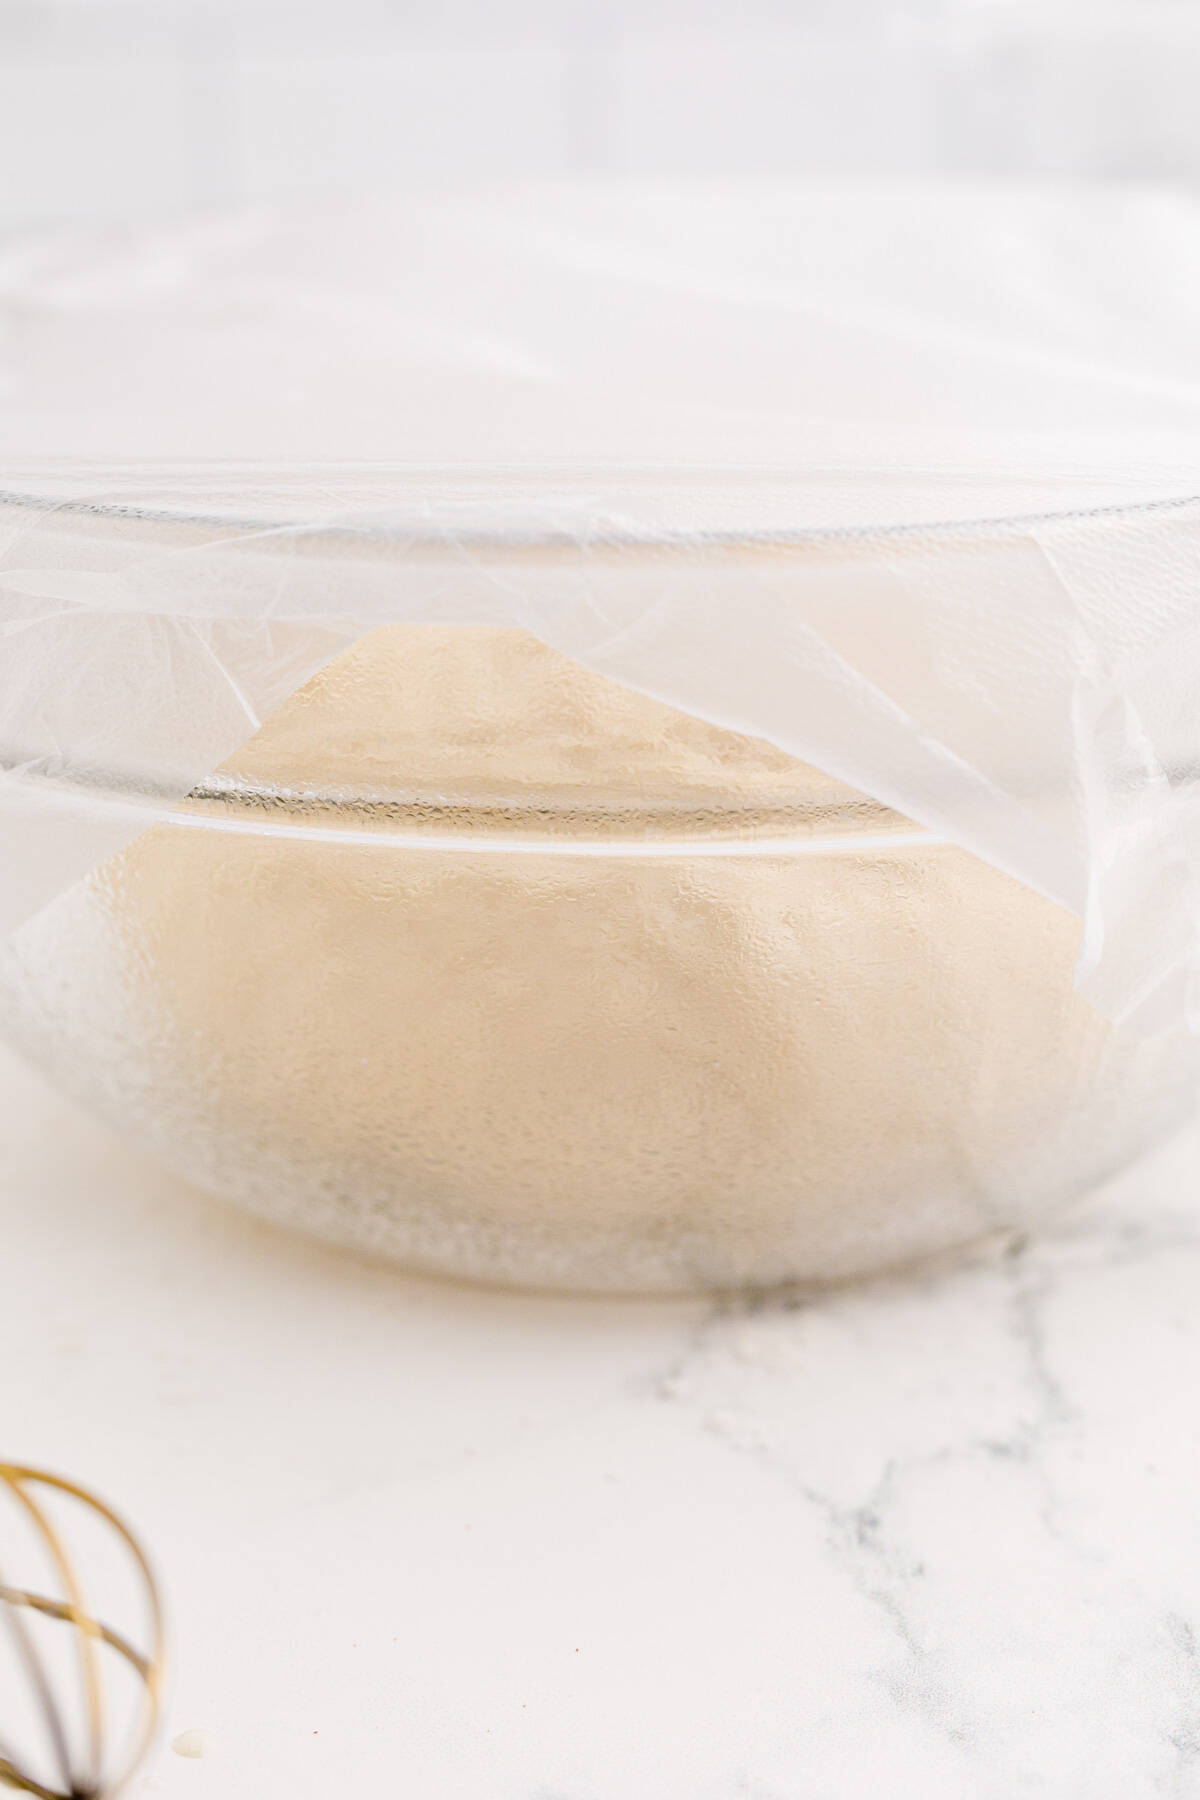 covered dough in a clear bowl rising